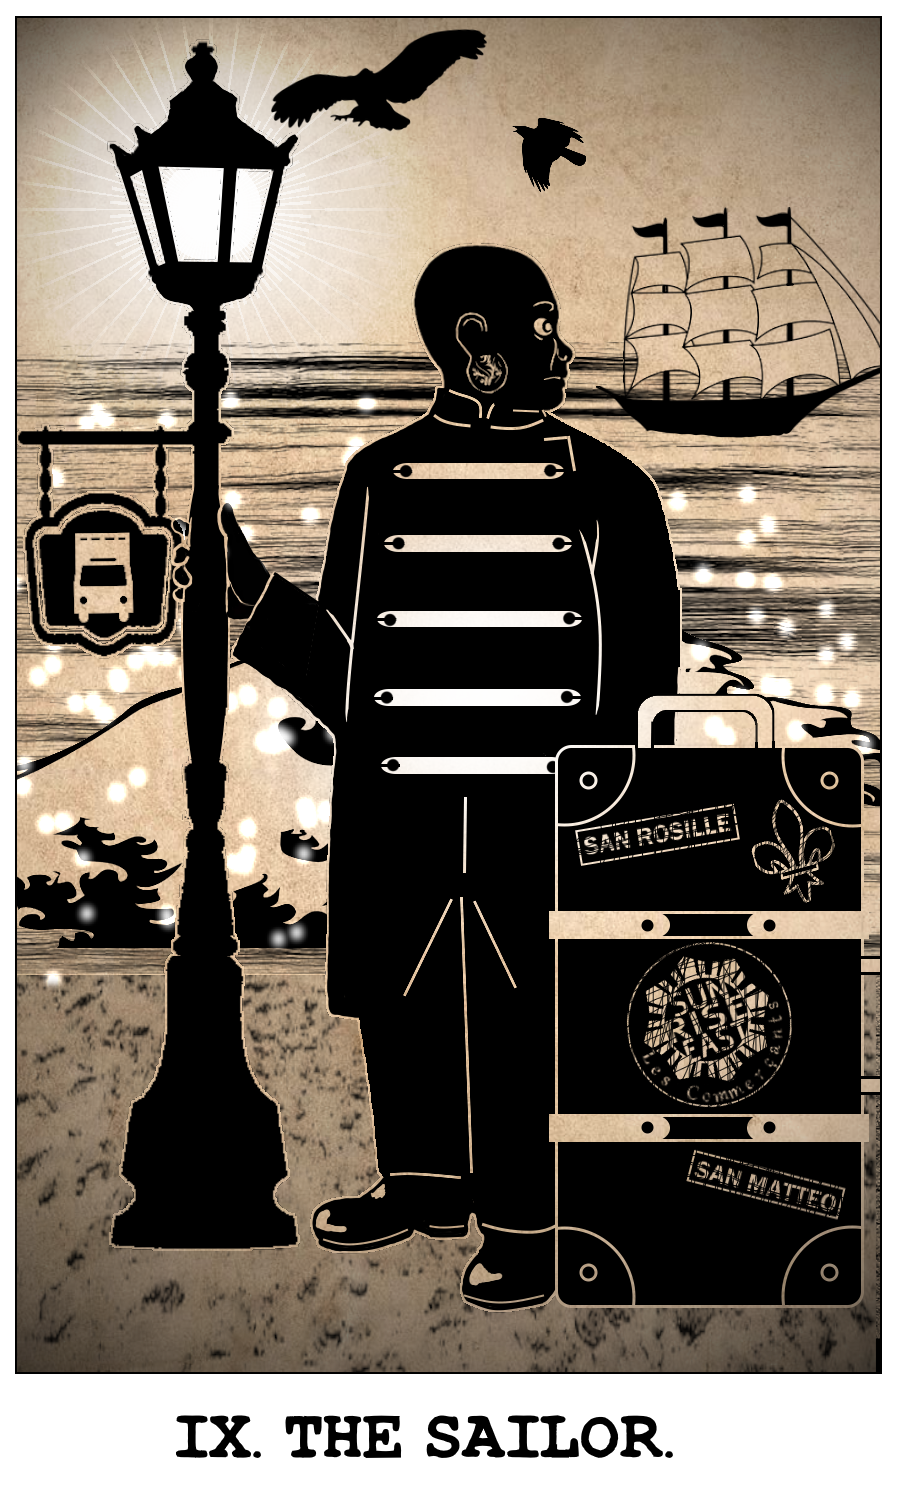 Sanaam's tarot card, The Sailor, based on The Hermit. He is standing at a bus stop with his trunk, waiting to go home, but looking over his shoulder at his ship and the sea.